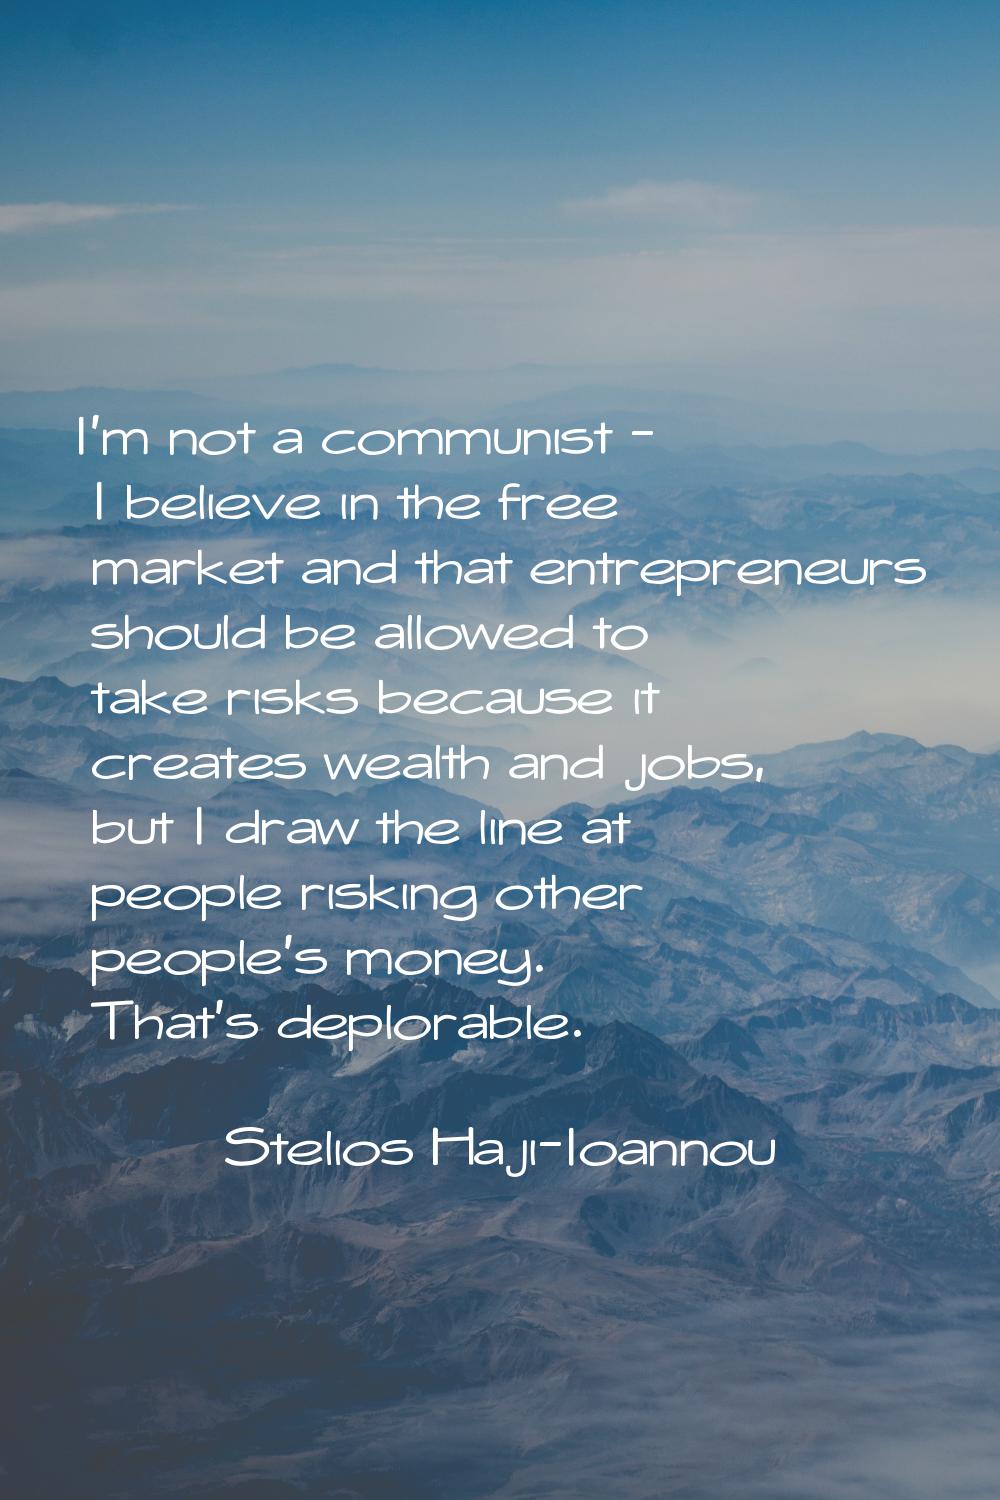 I'm not a communist - I believe in the free market and that entrepreneurs should be allowed to take